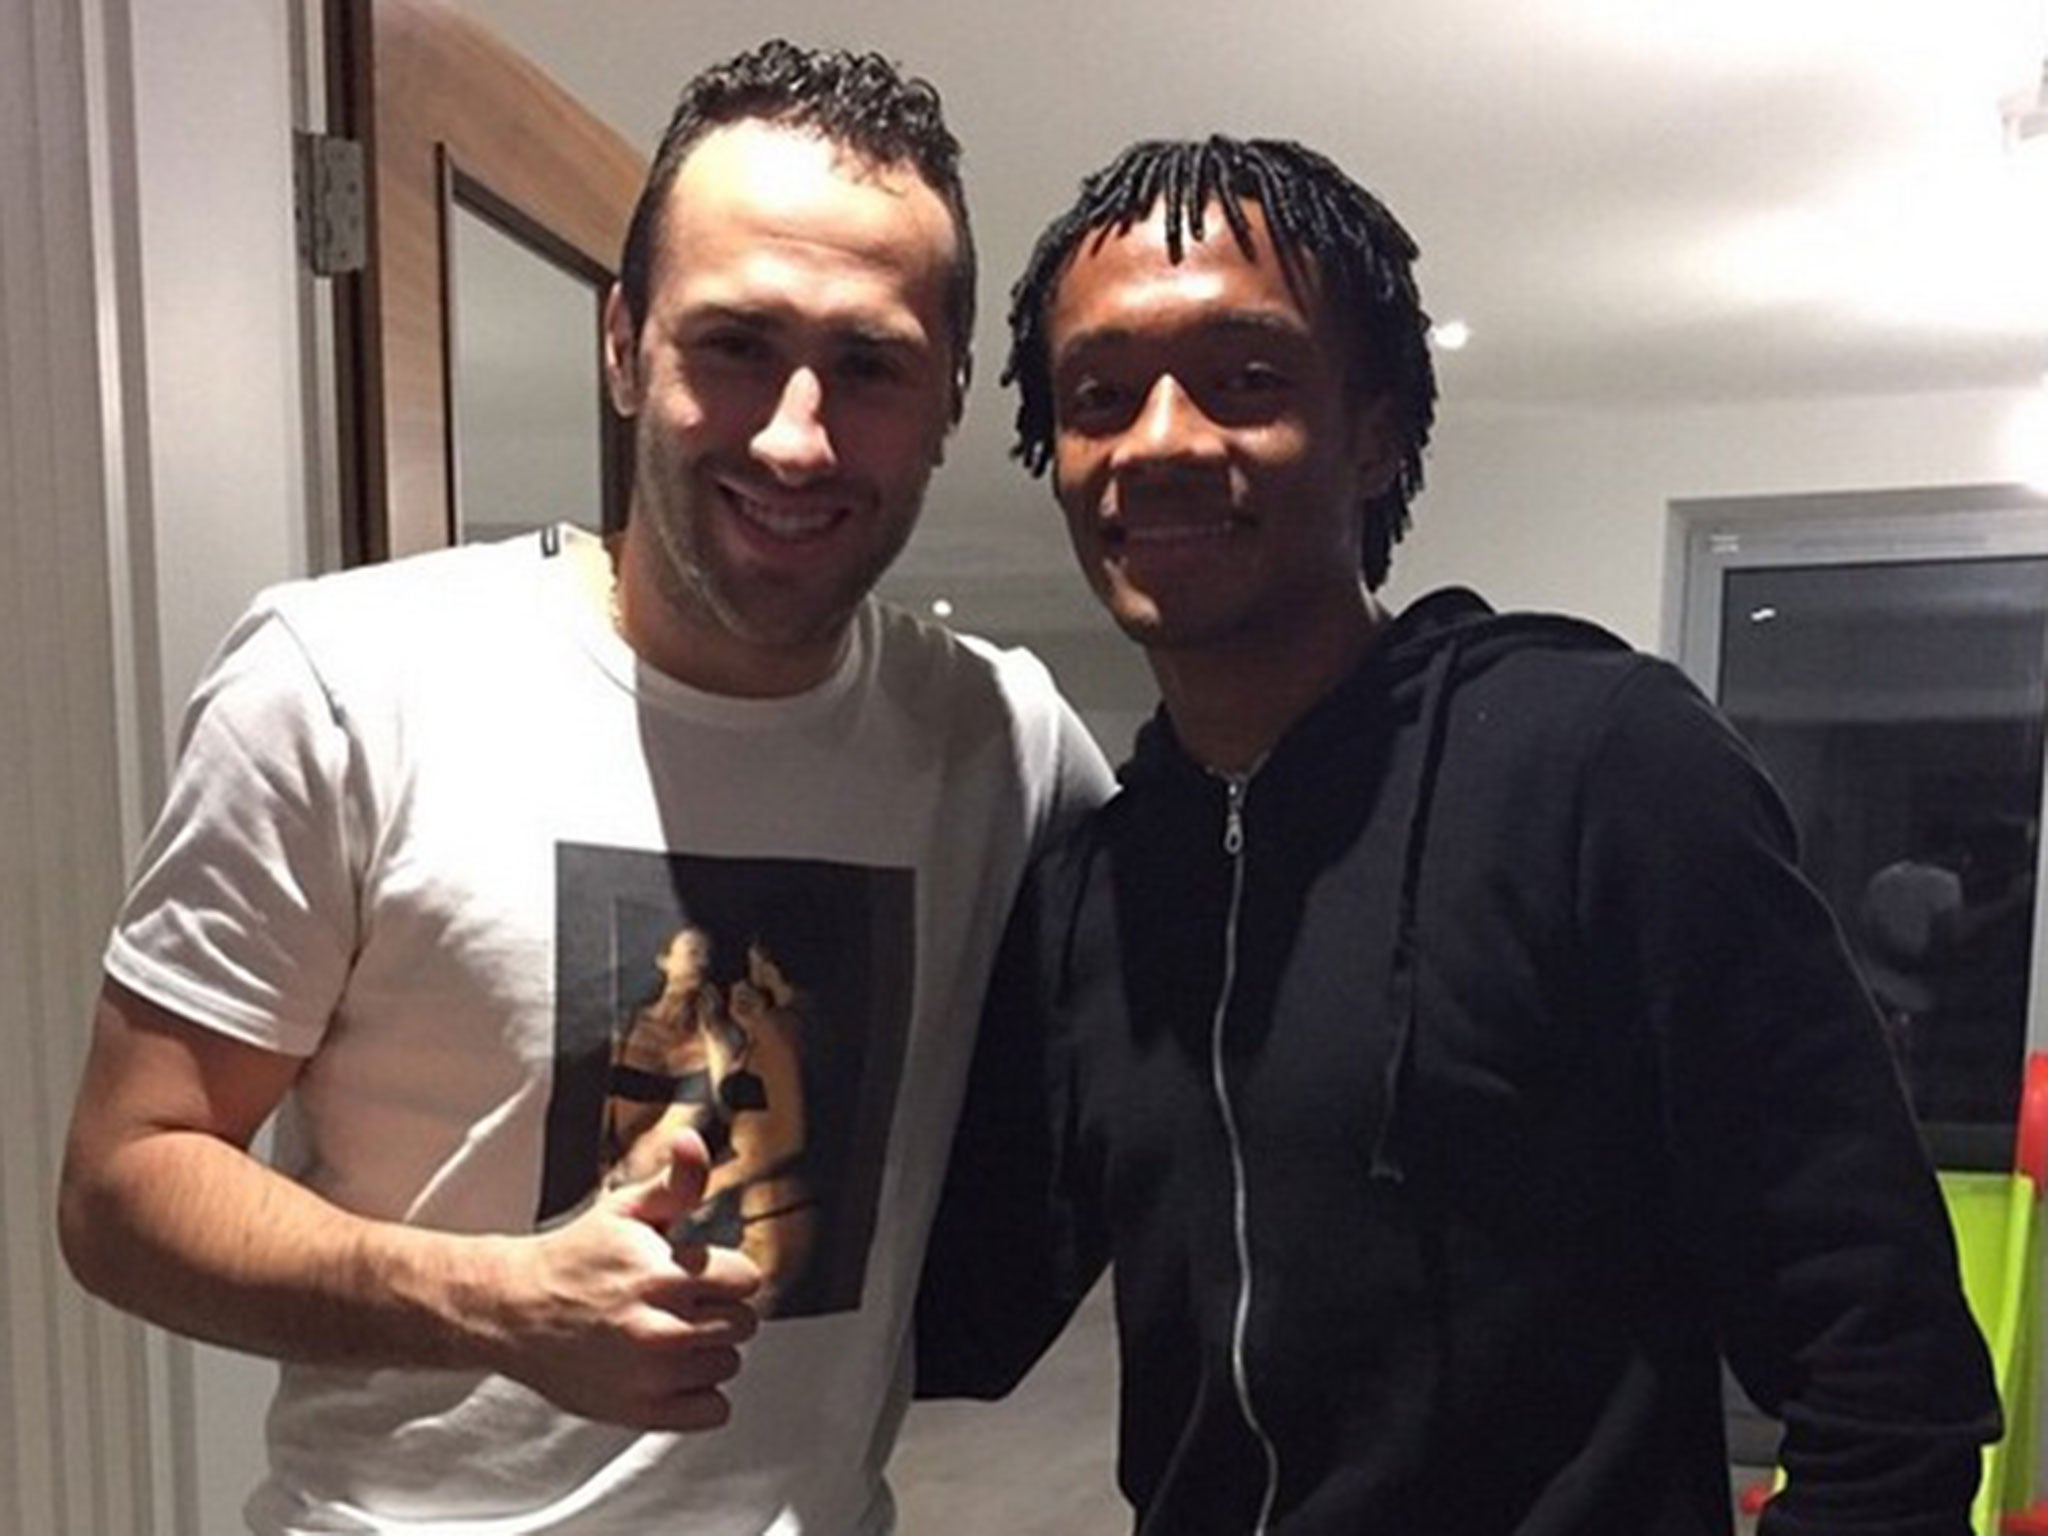 David Ospina (left) posted this picture with and Juan Cuadrado last night